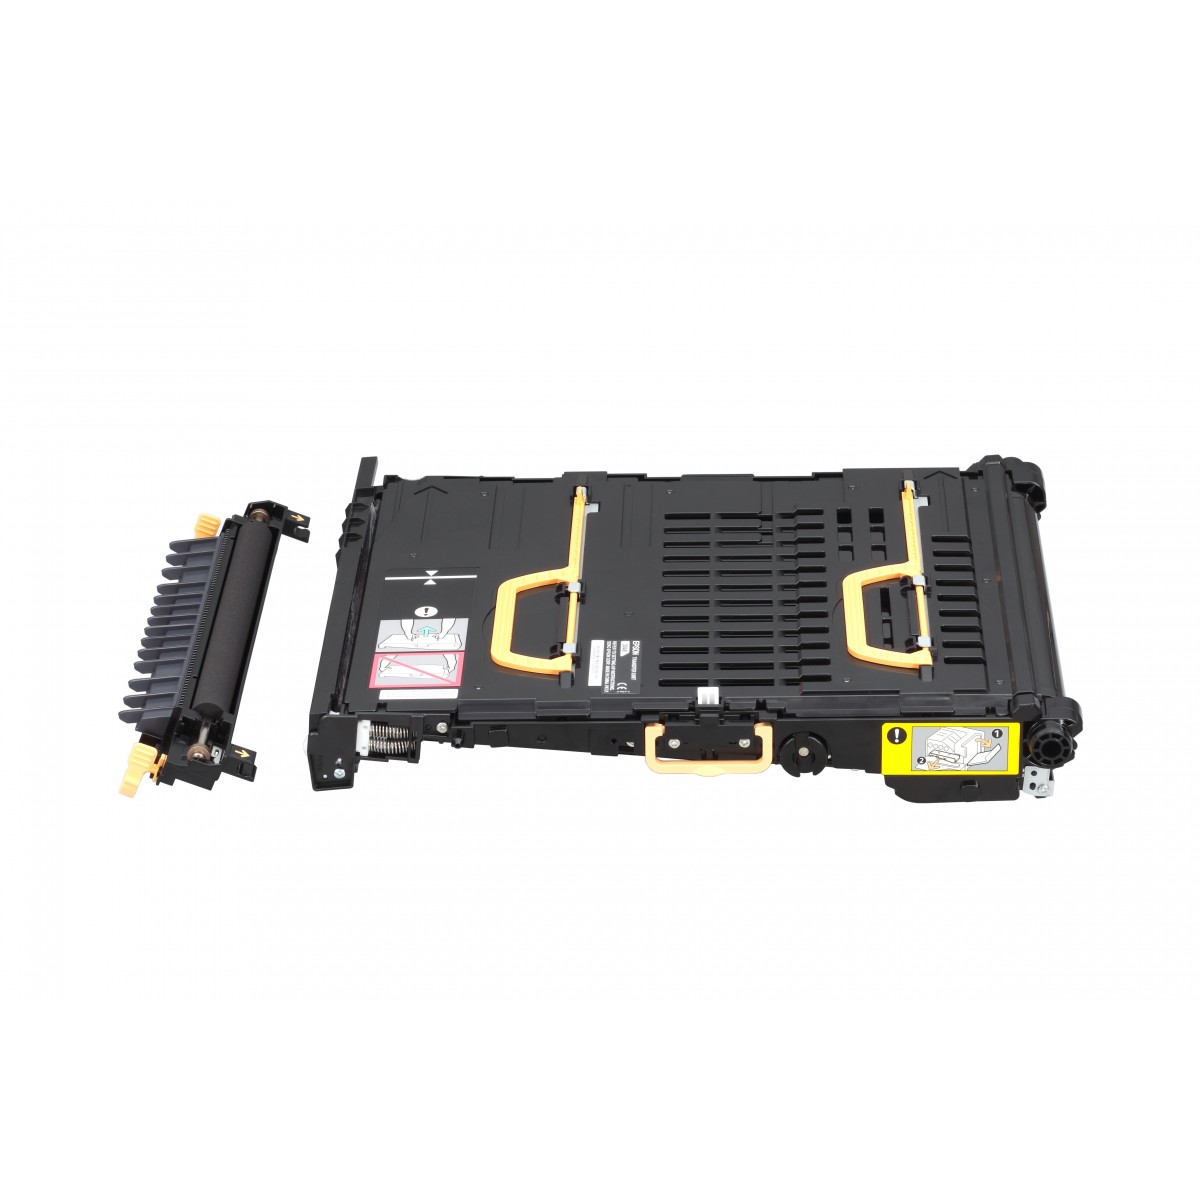 Epson Transfer Unit 150K - Laser - China - The models below are compatible with one or more items in this range. For more detail